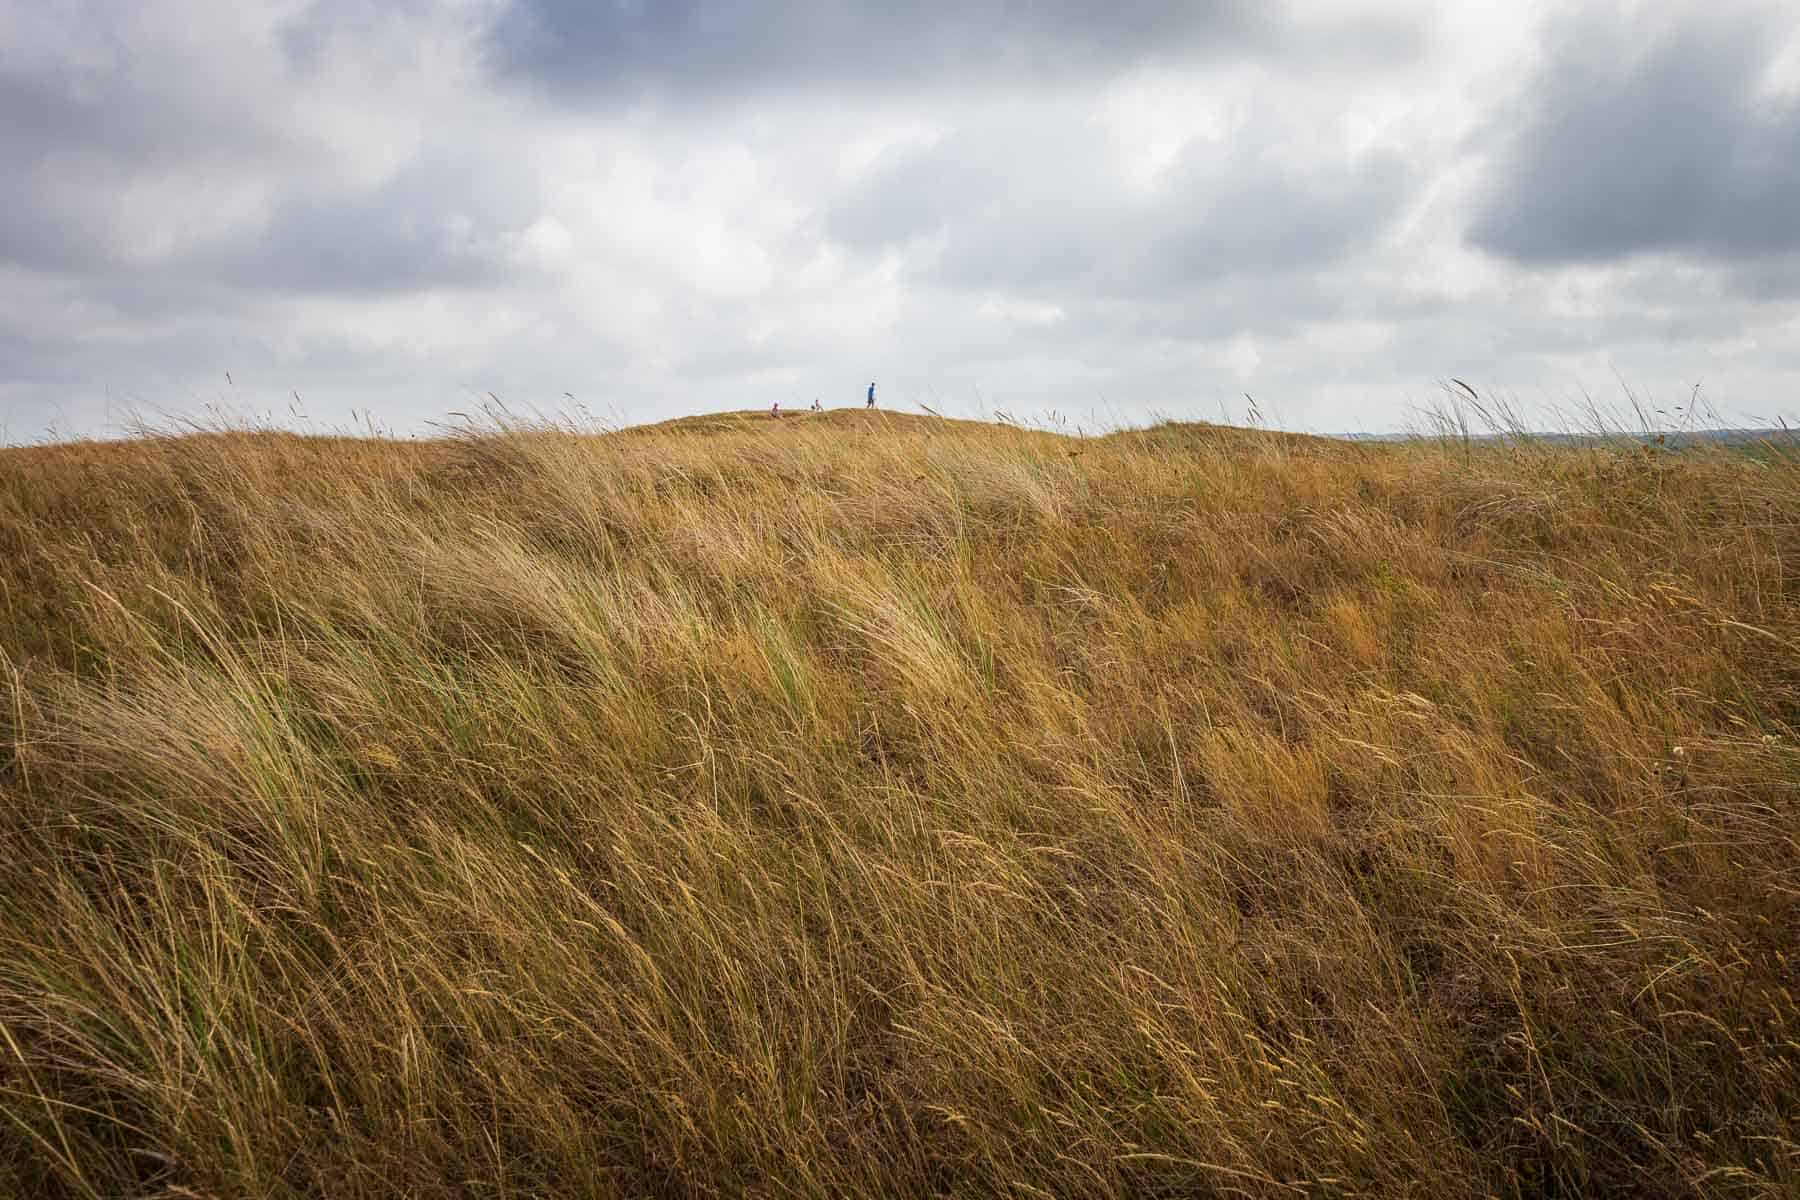 On top of the Texel dune